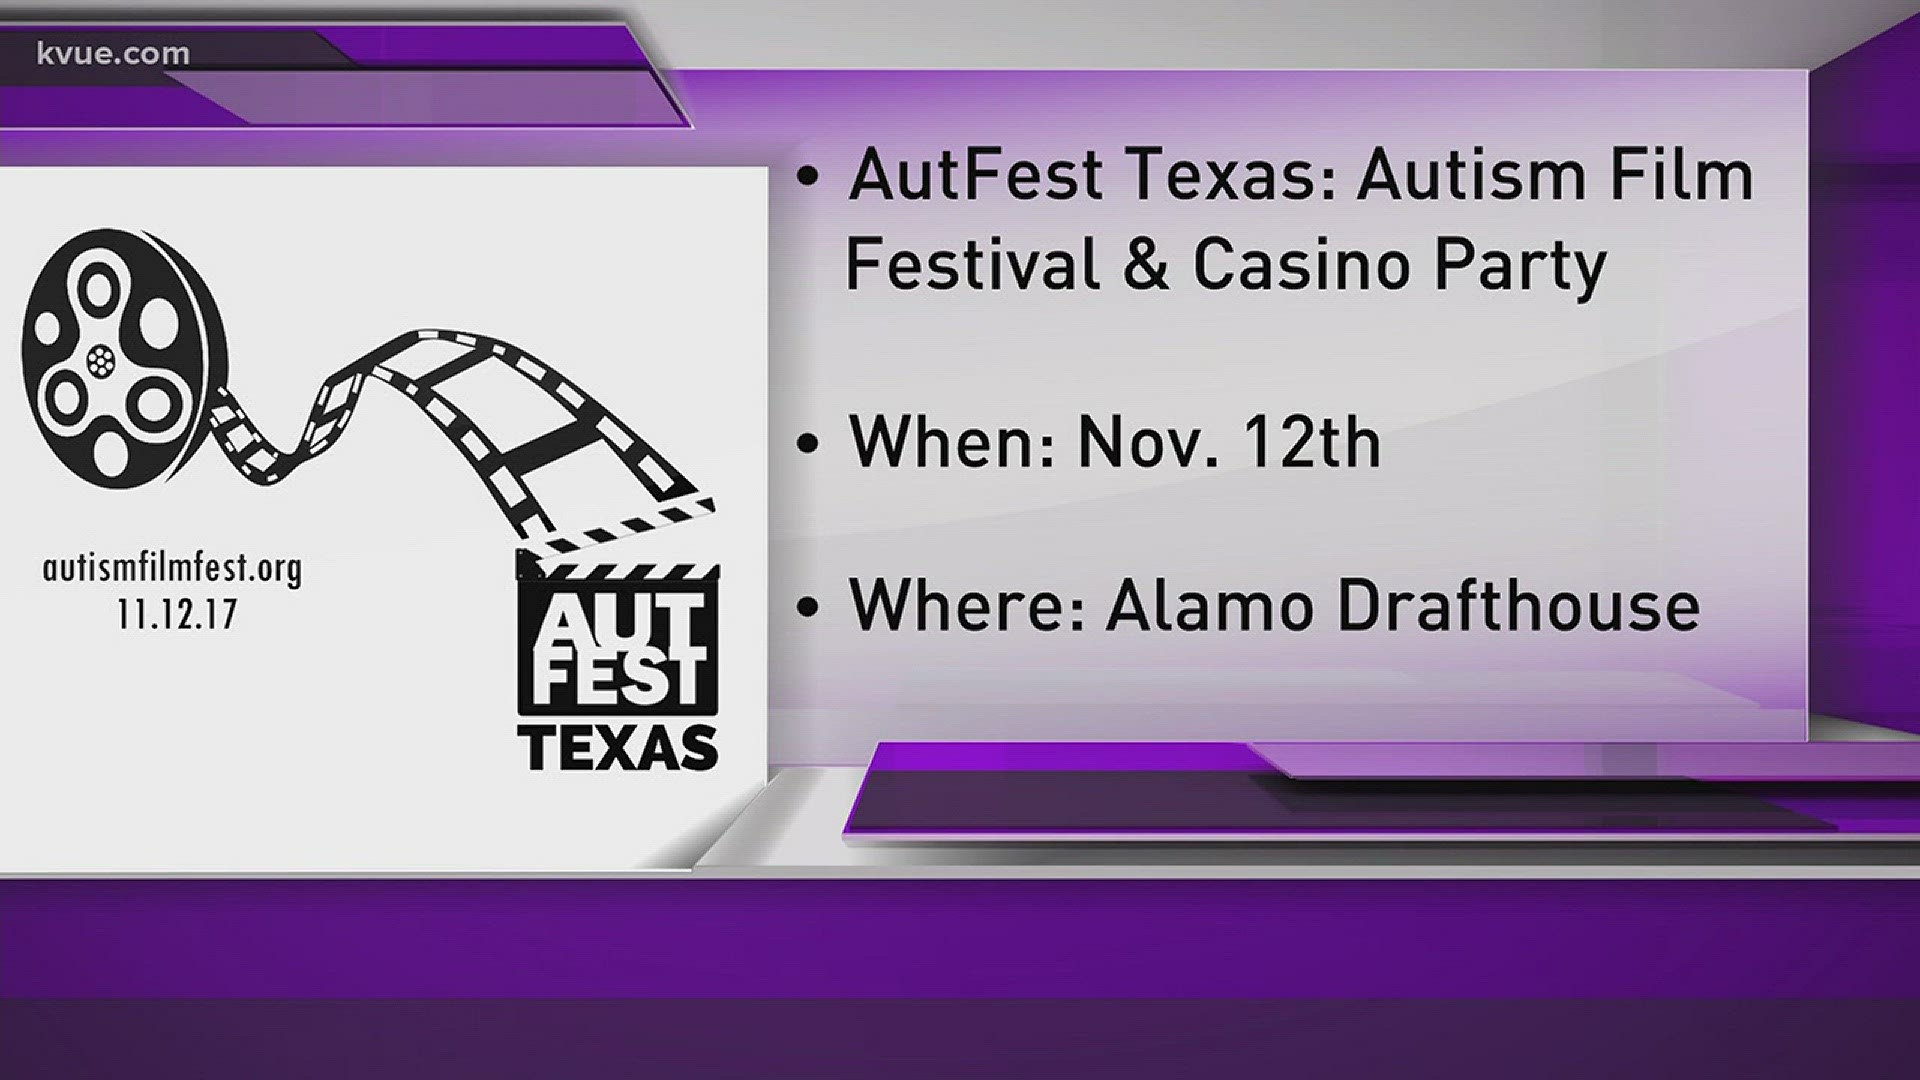 Jacquie Benestante with the Autism Society of Texas talks about the second annual Autism Film Festival, AutFest Texas, which will be Nov. 12 at the Alamo Drafthouse South Lamar.